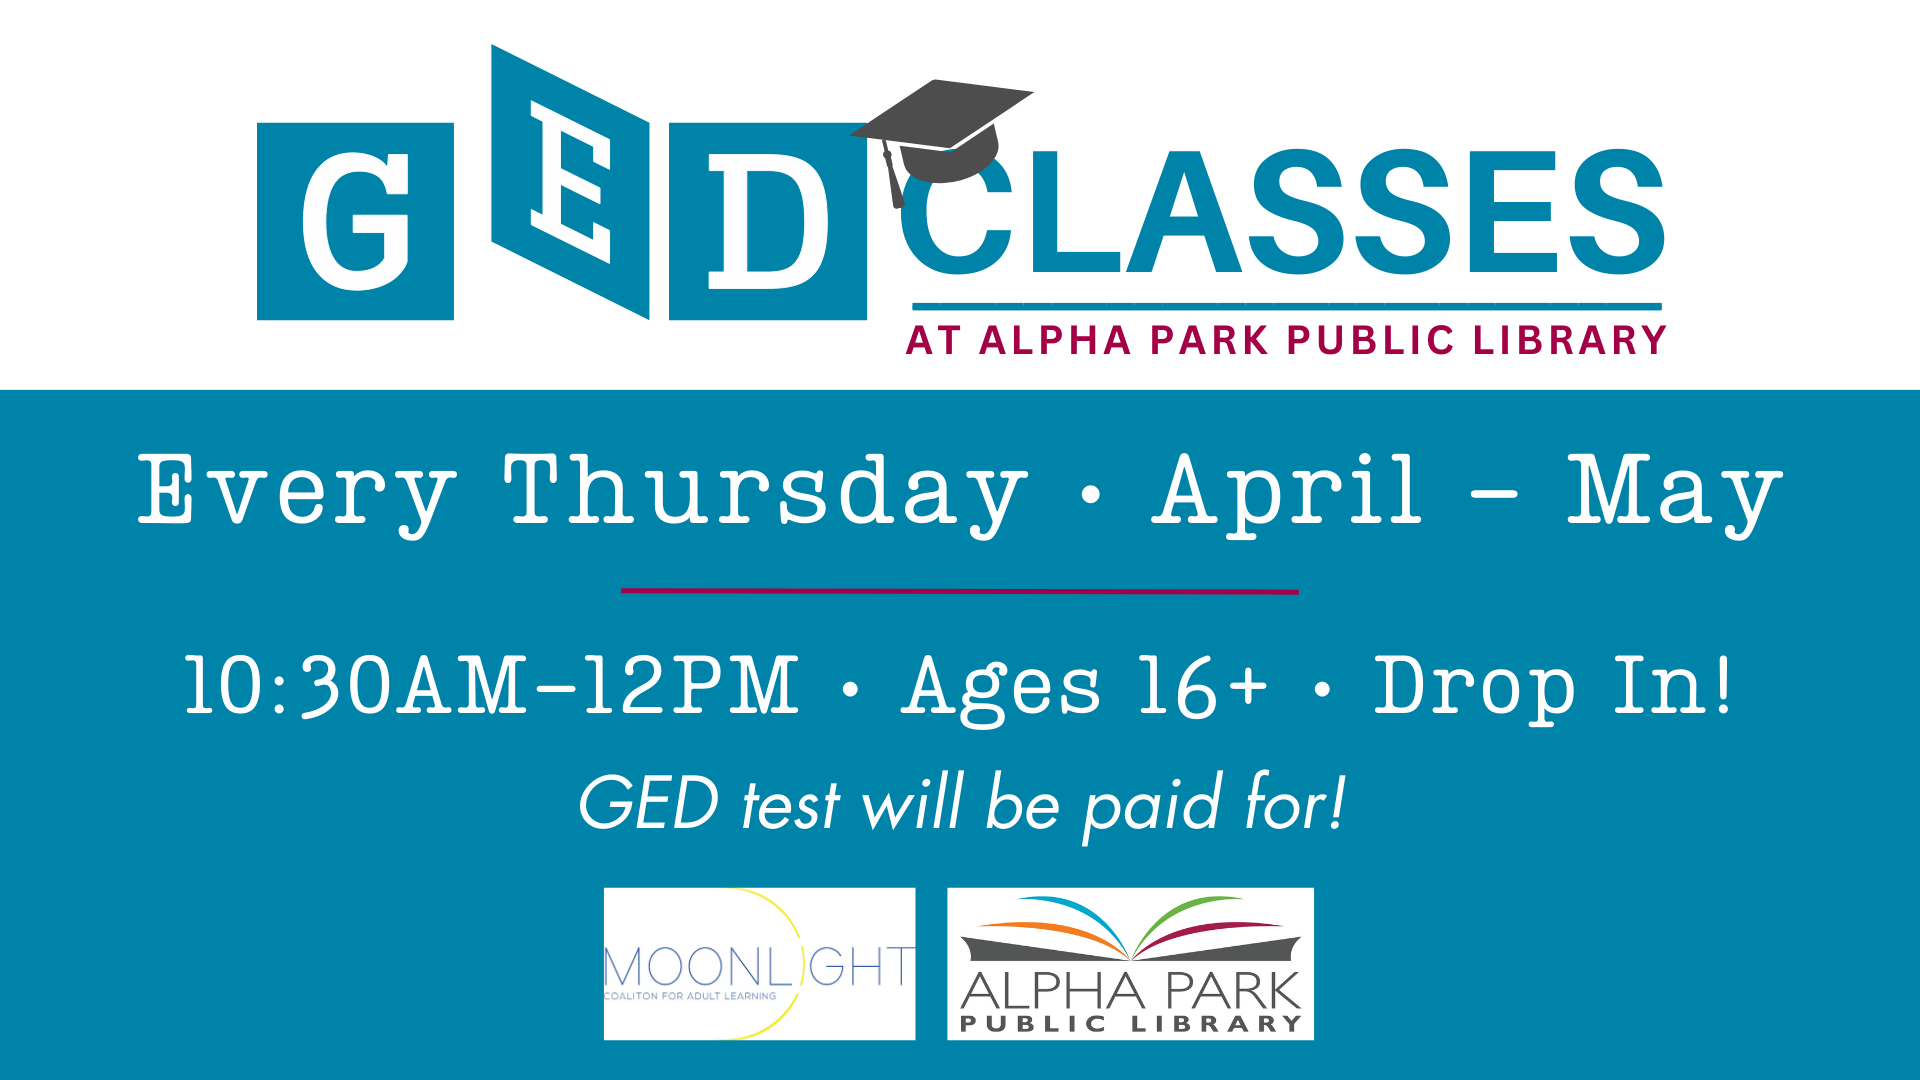 teal and white GED classes logo with text and logos